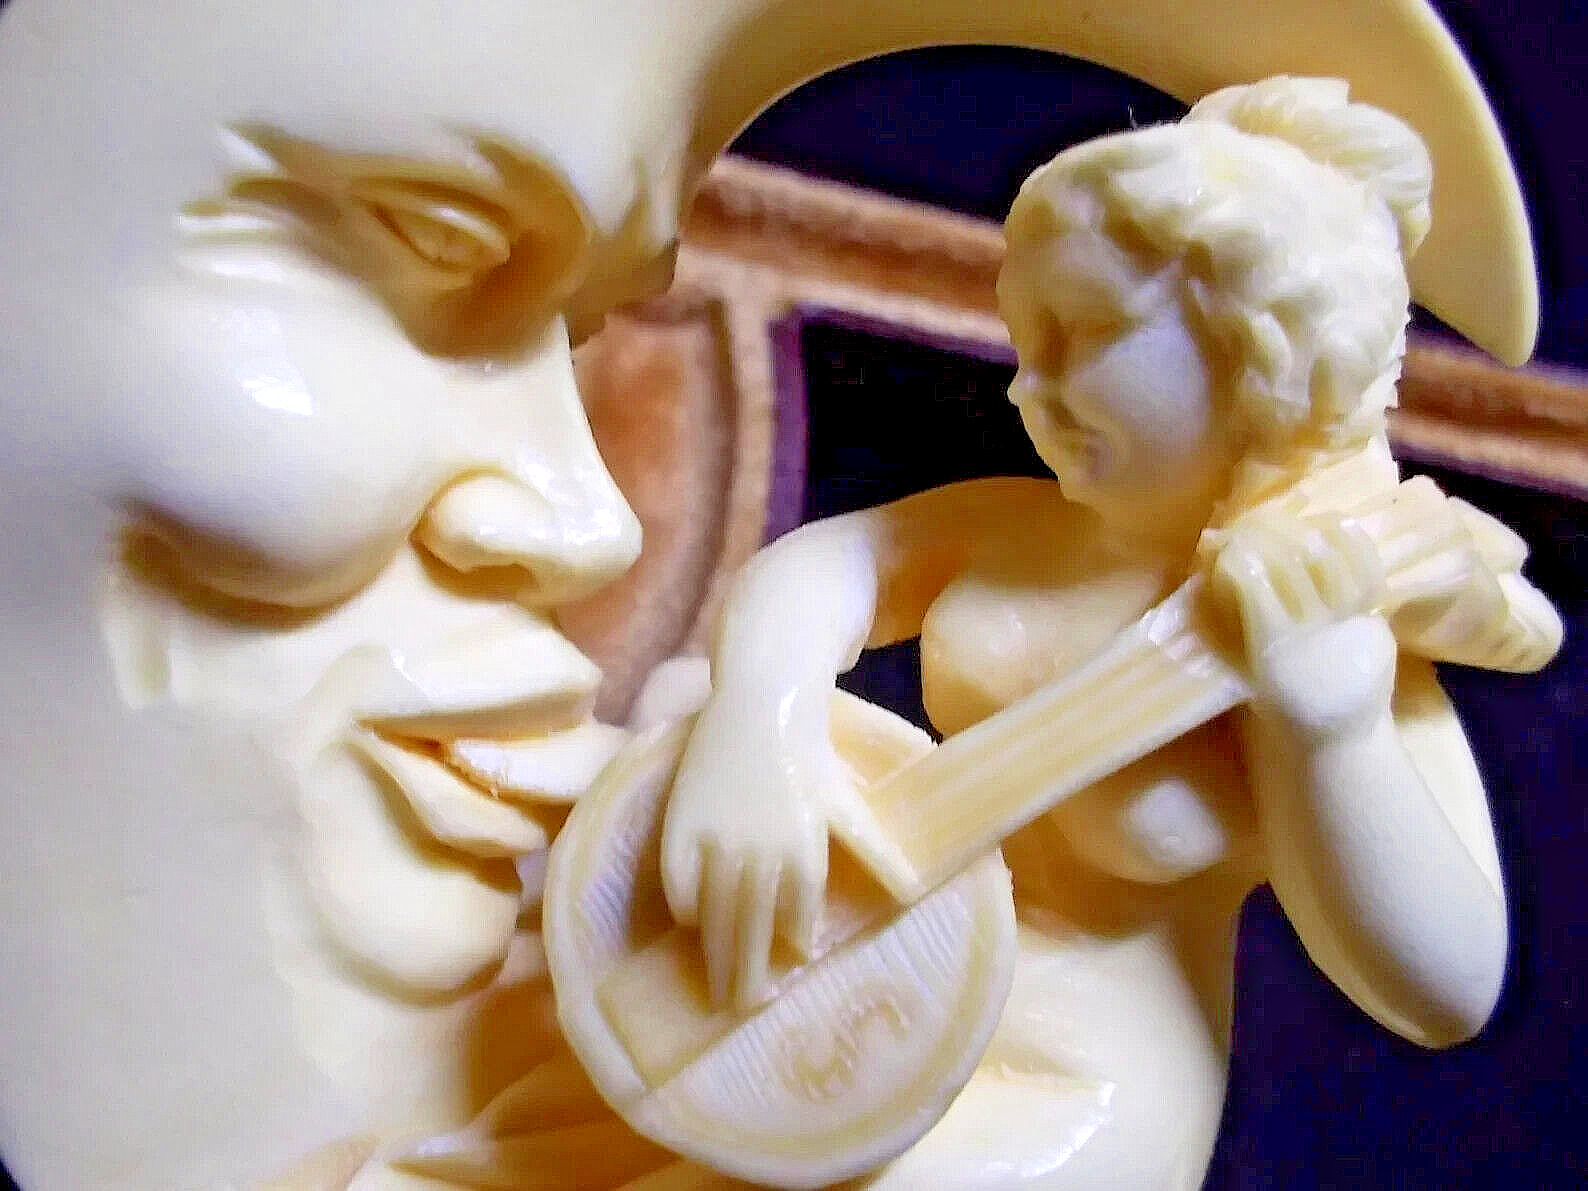 🔴UNSMOKED S. YANIK MEERSCHAUM PIPE FEATURING NUDE WOMAN PLAYING a BANJO MOON